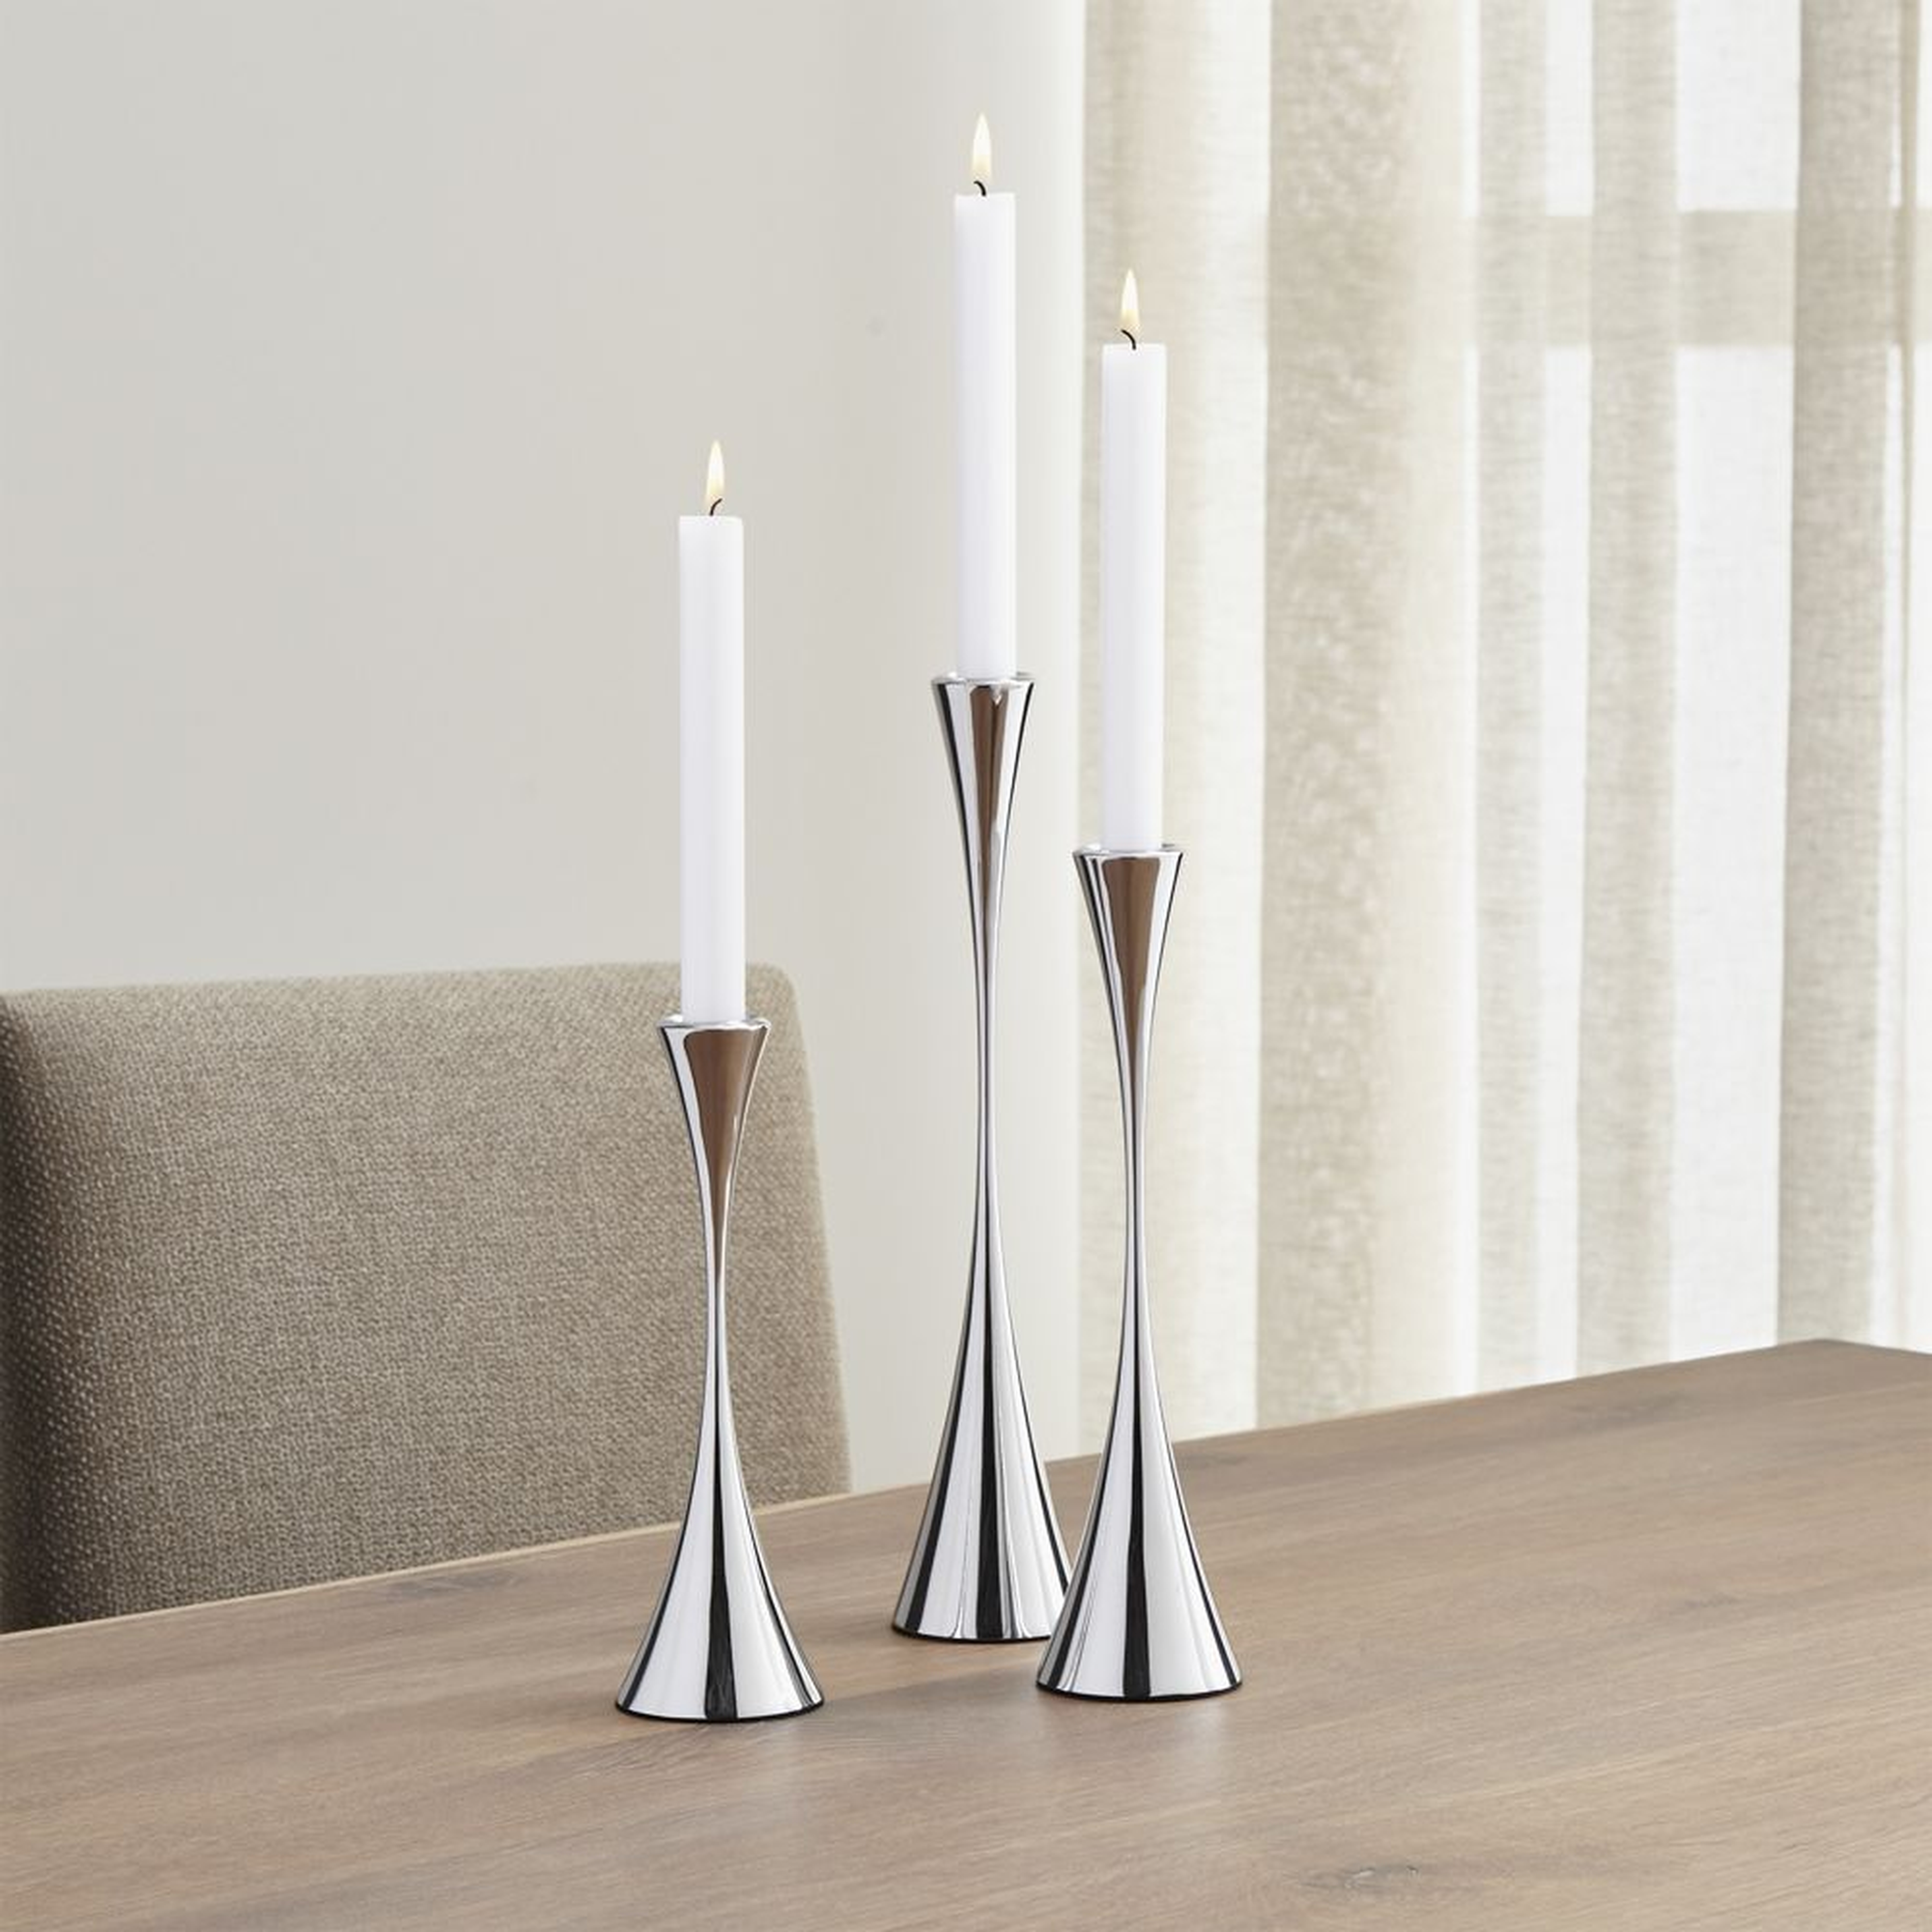 3-Piece Arden Mirrored Stainless Steel Taper Candle Holder Set - Crate and Barrel